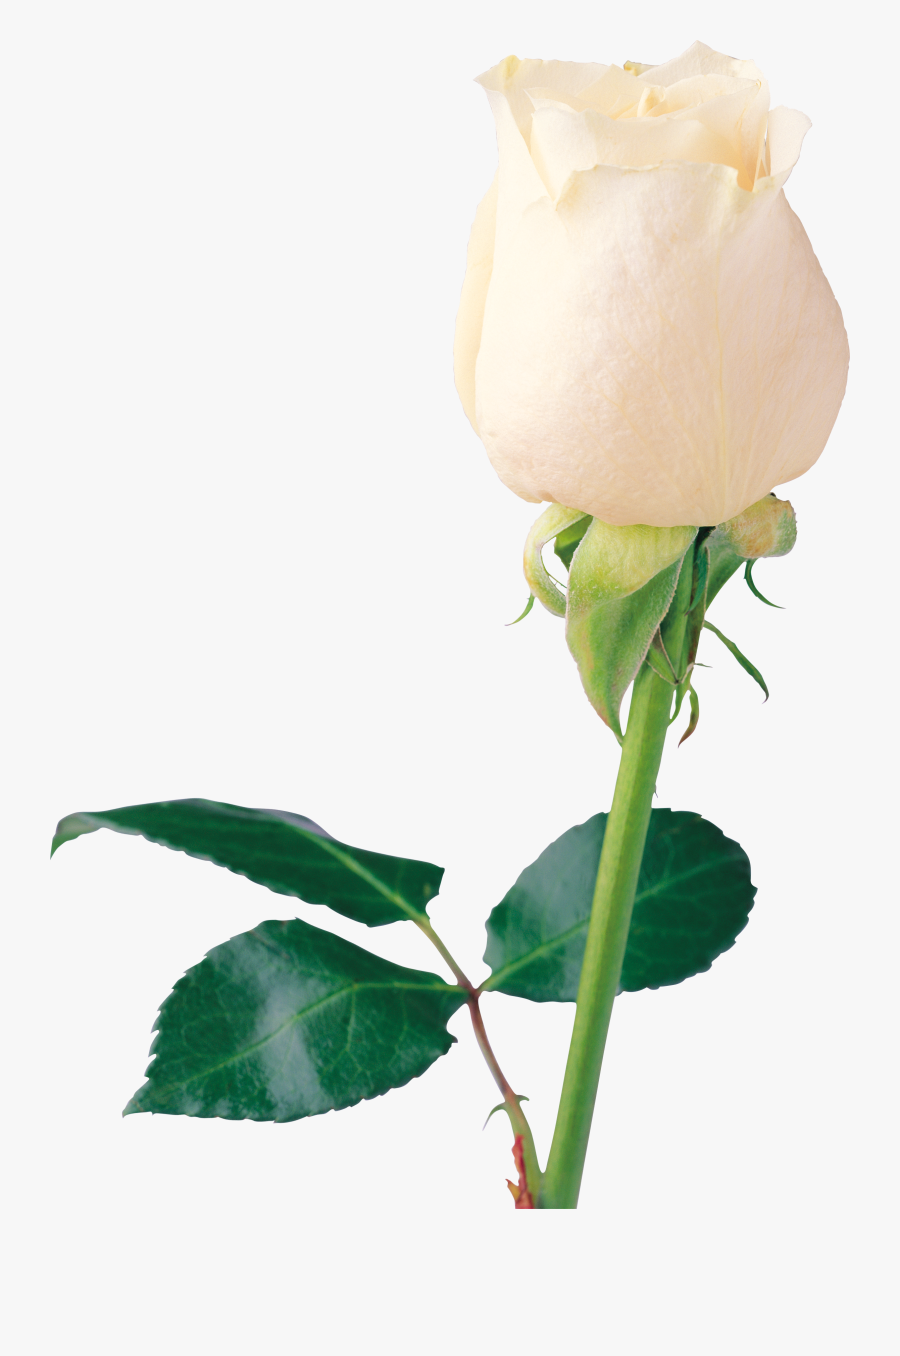 White Rose Png Image, Flower White Rose Png Picture, Transparent Clipart